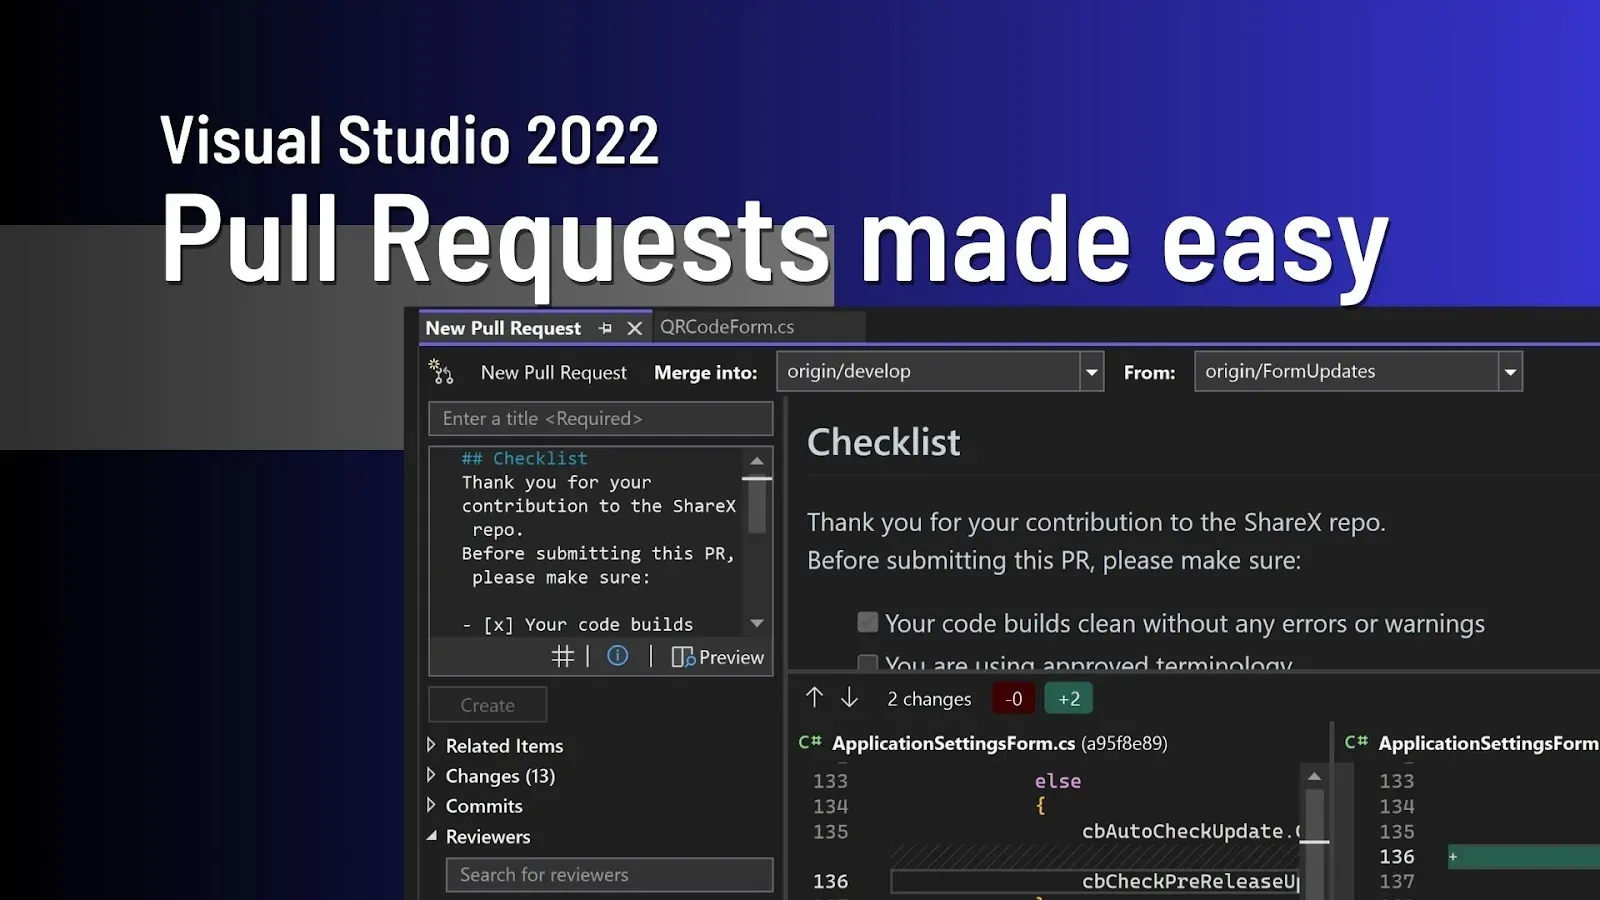 A Deep Dive into Visual Studio 2022's New Pull Request Feature